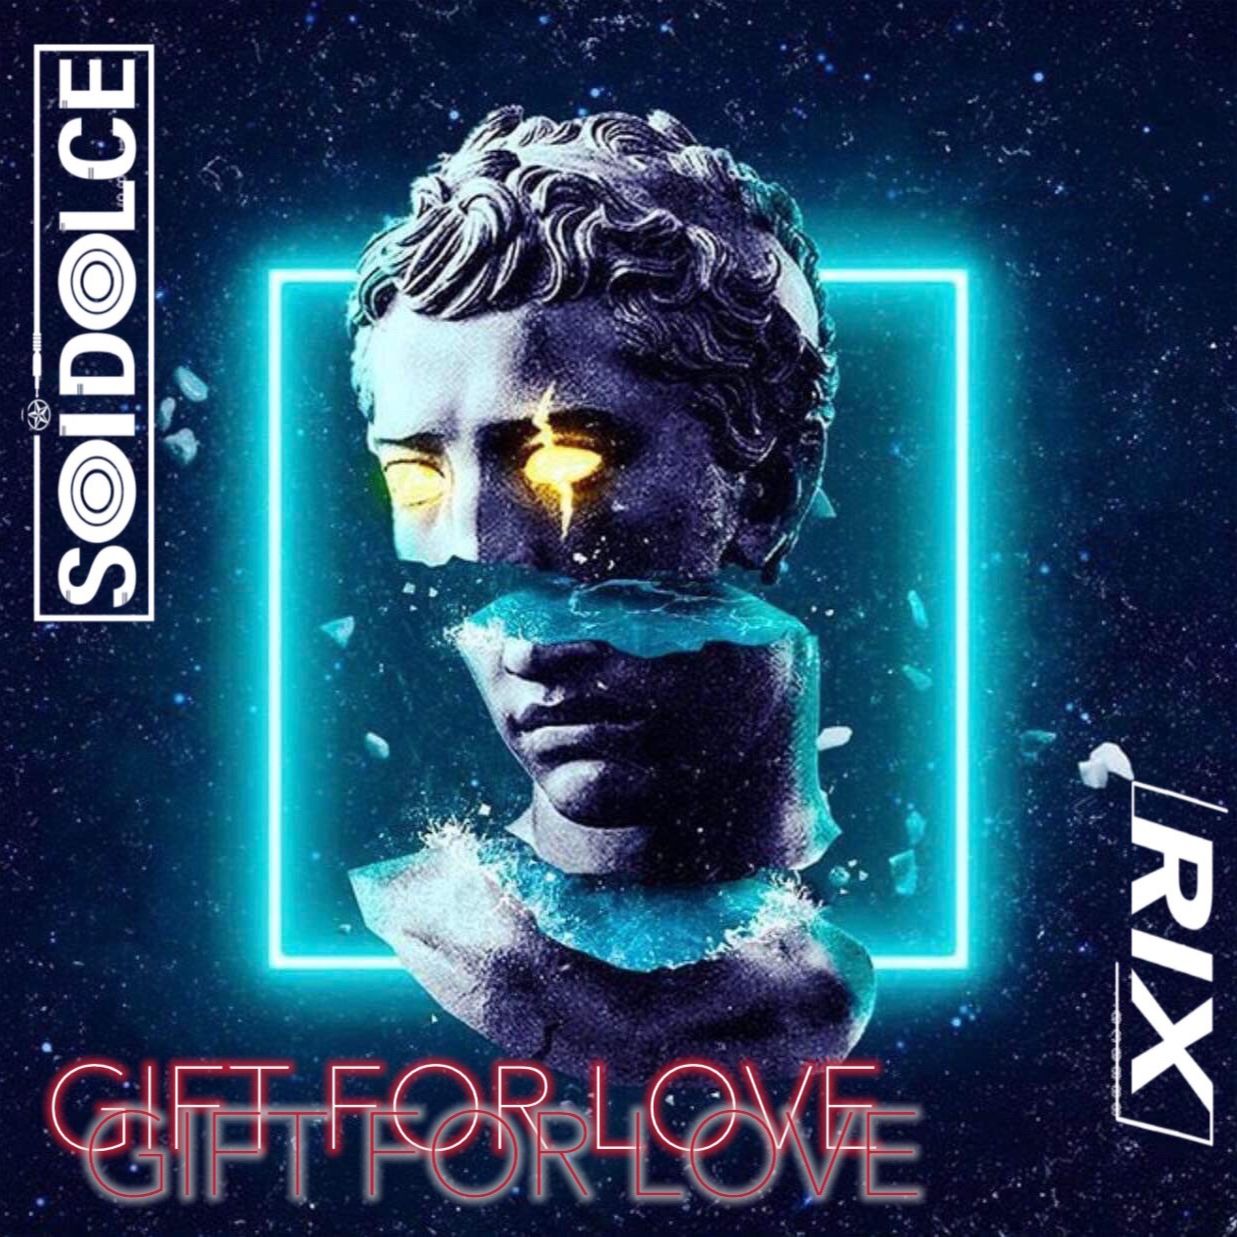 Download GIFT FOR LOVE - SOI DOLCE x RIX